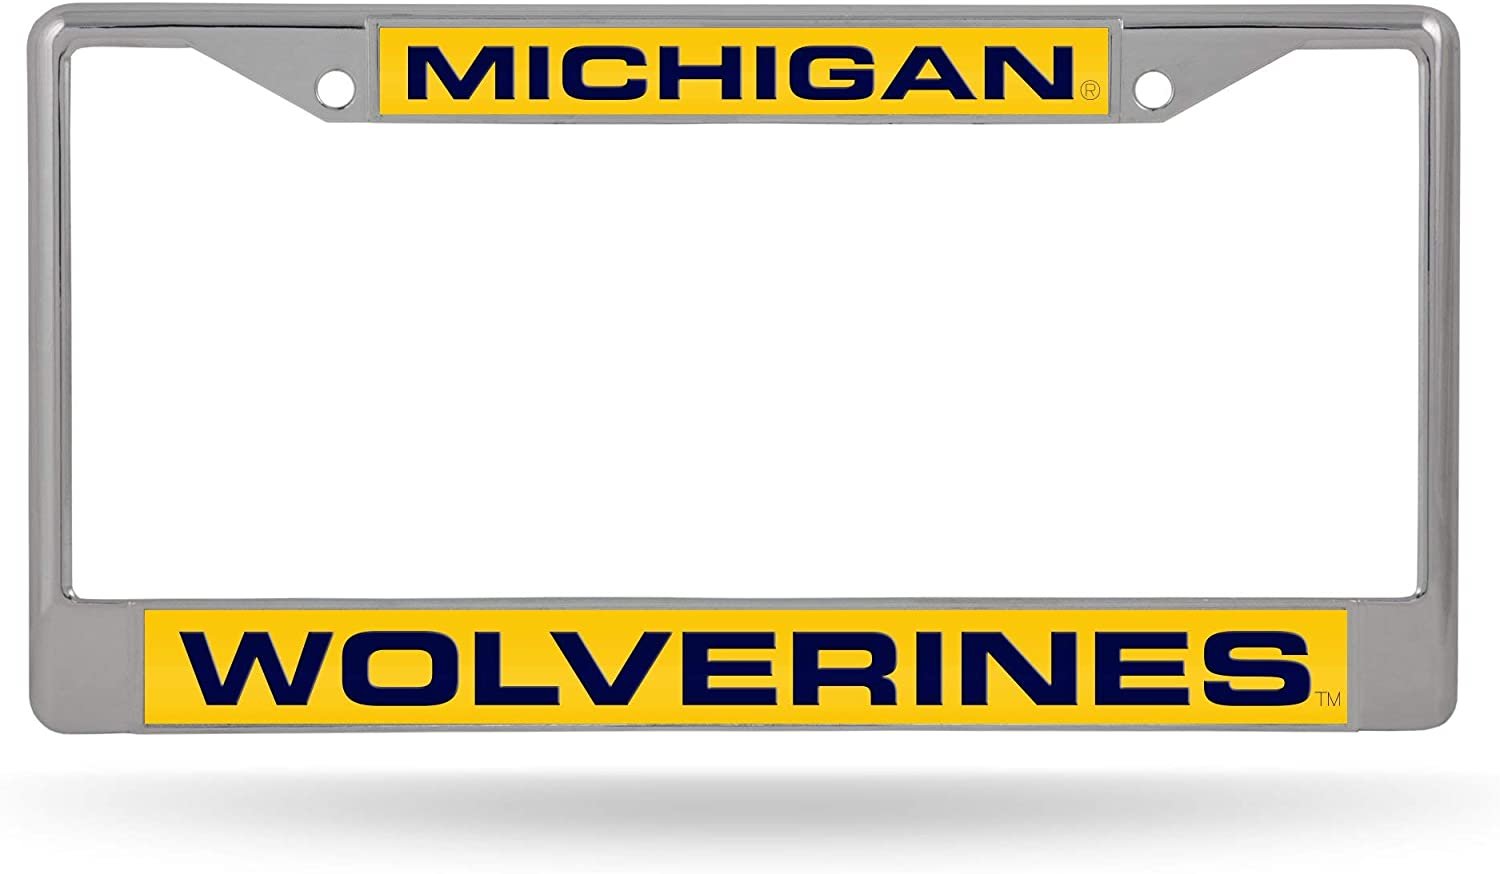 University of Michigan Wolverines Chrome Metal License Plate Frame Tag Cover, Laser Acrylic Mirrored Inserts, 12x6 Inch